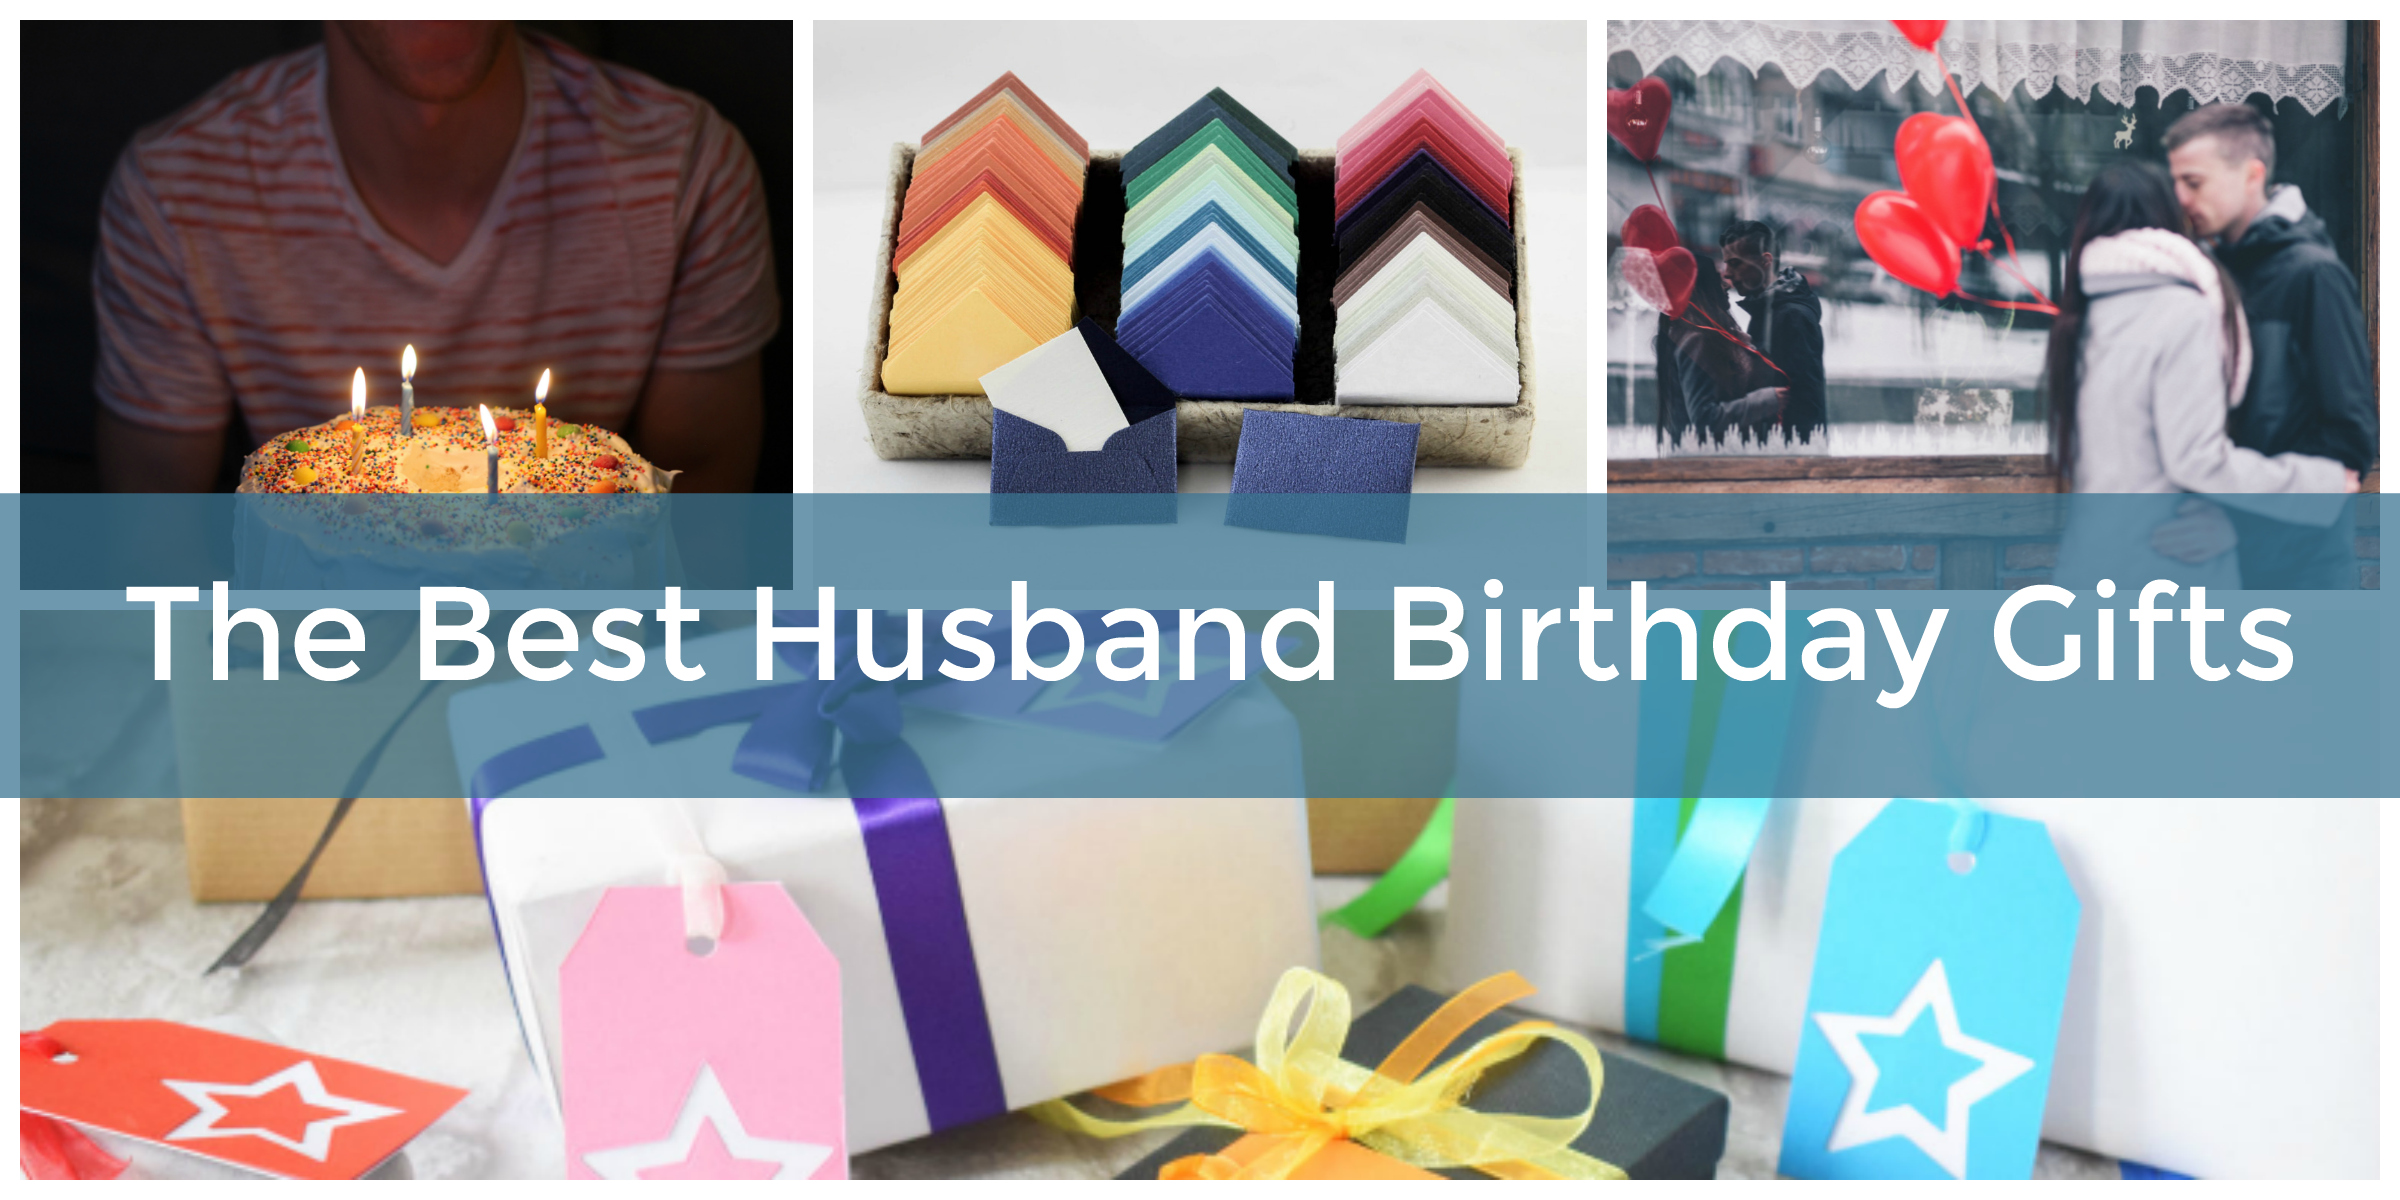 gifts to get your husband for his birthday